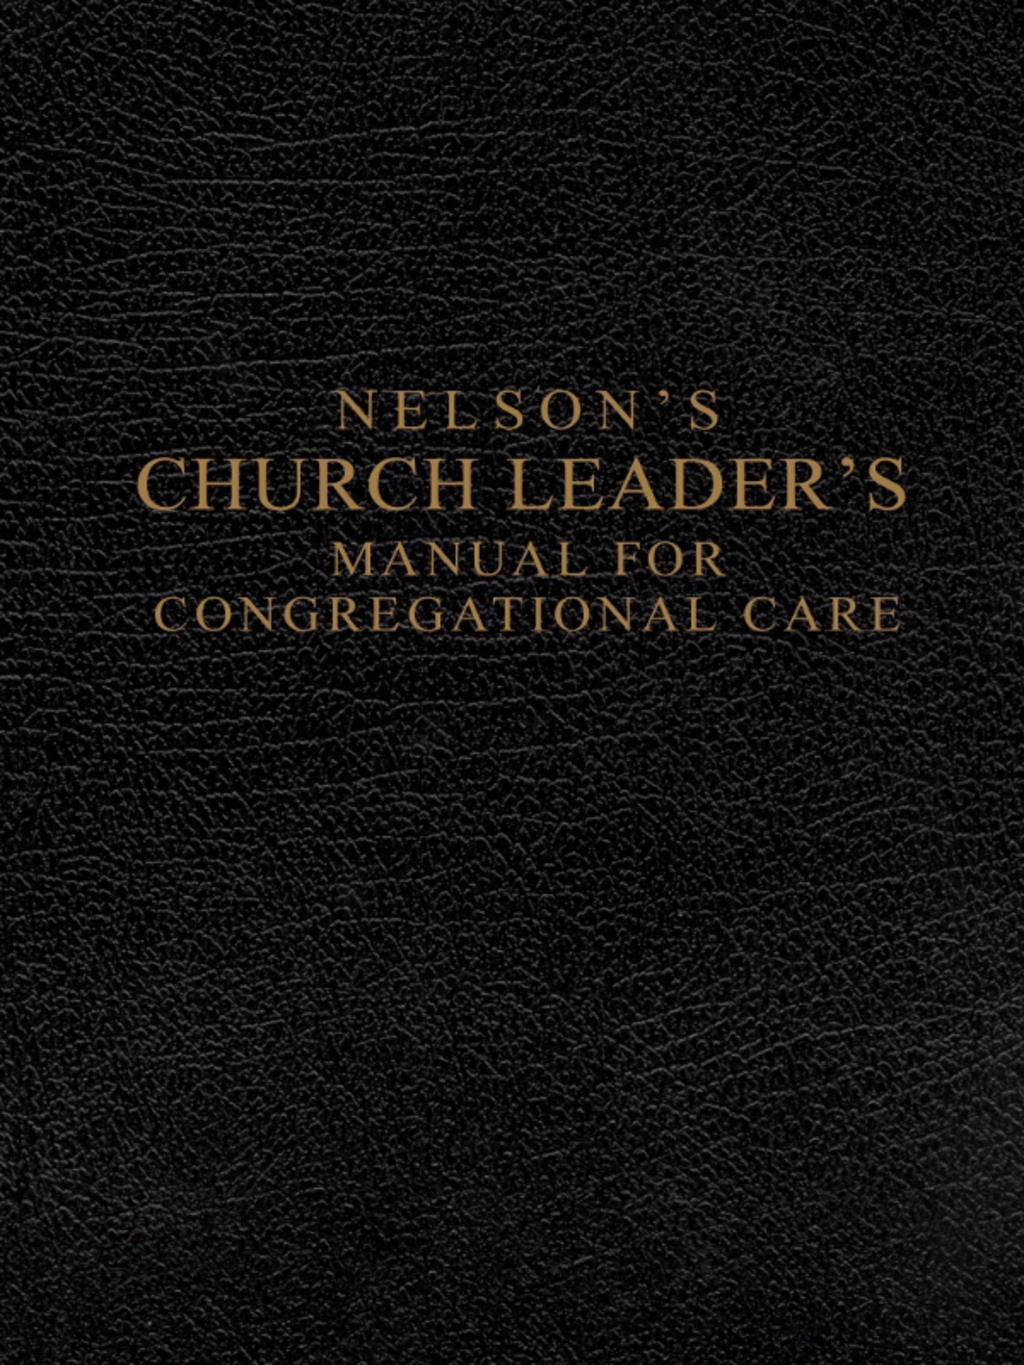 Nelson's Church Leader's Manual for Congregational Care (eBook) - Thomas Nelson,